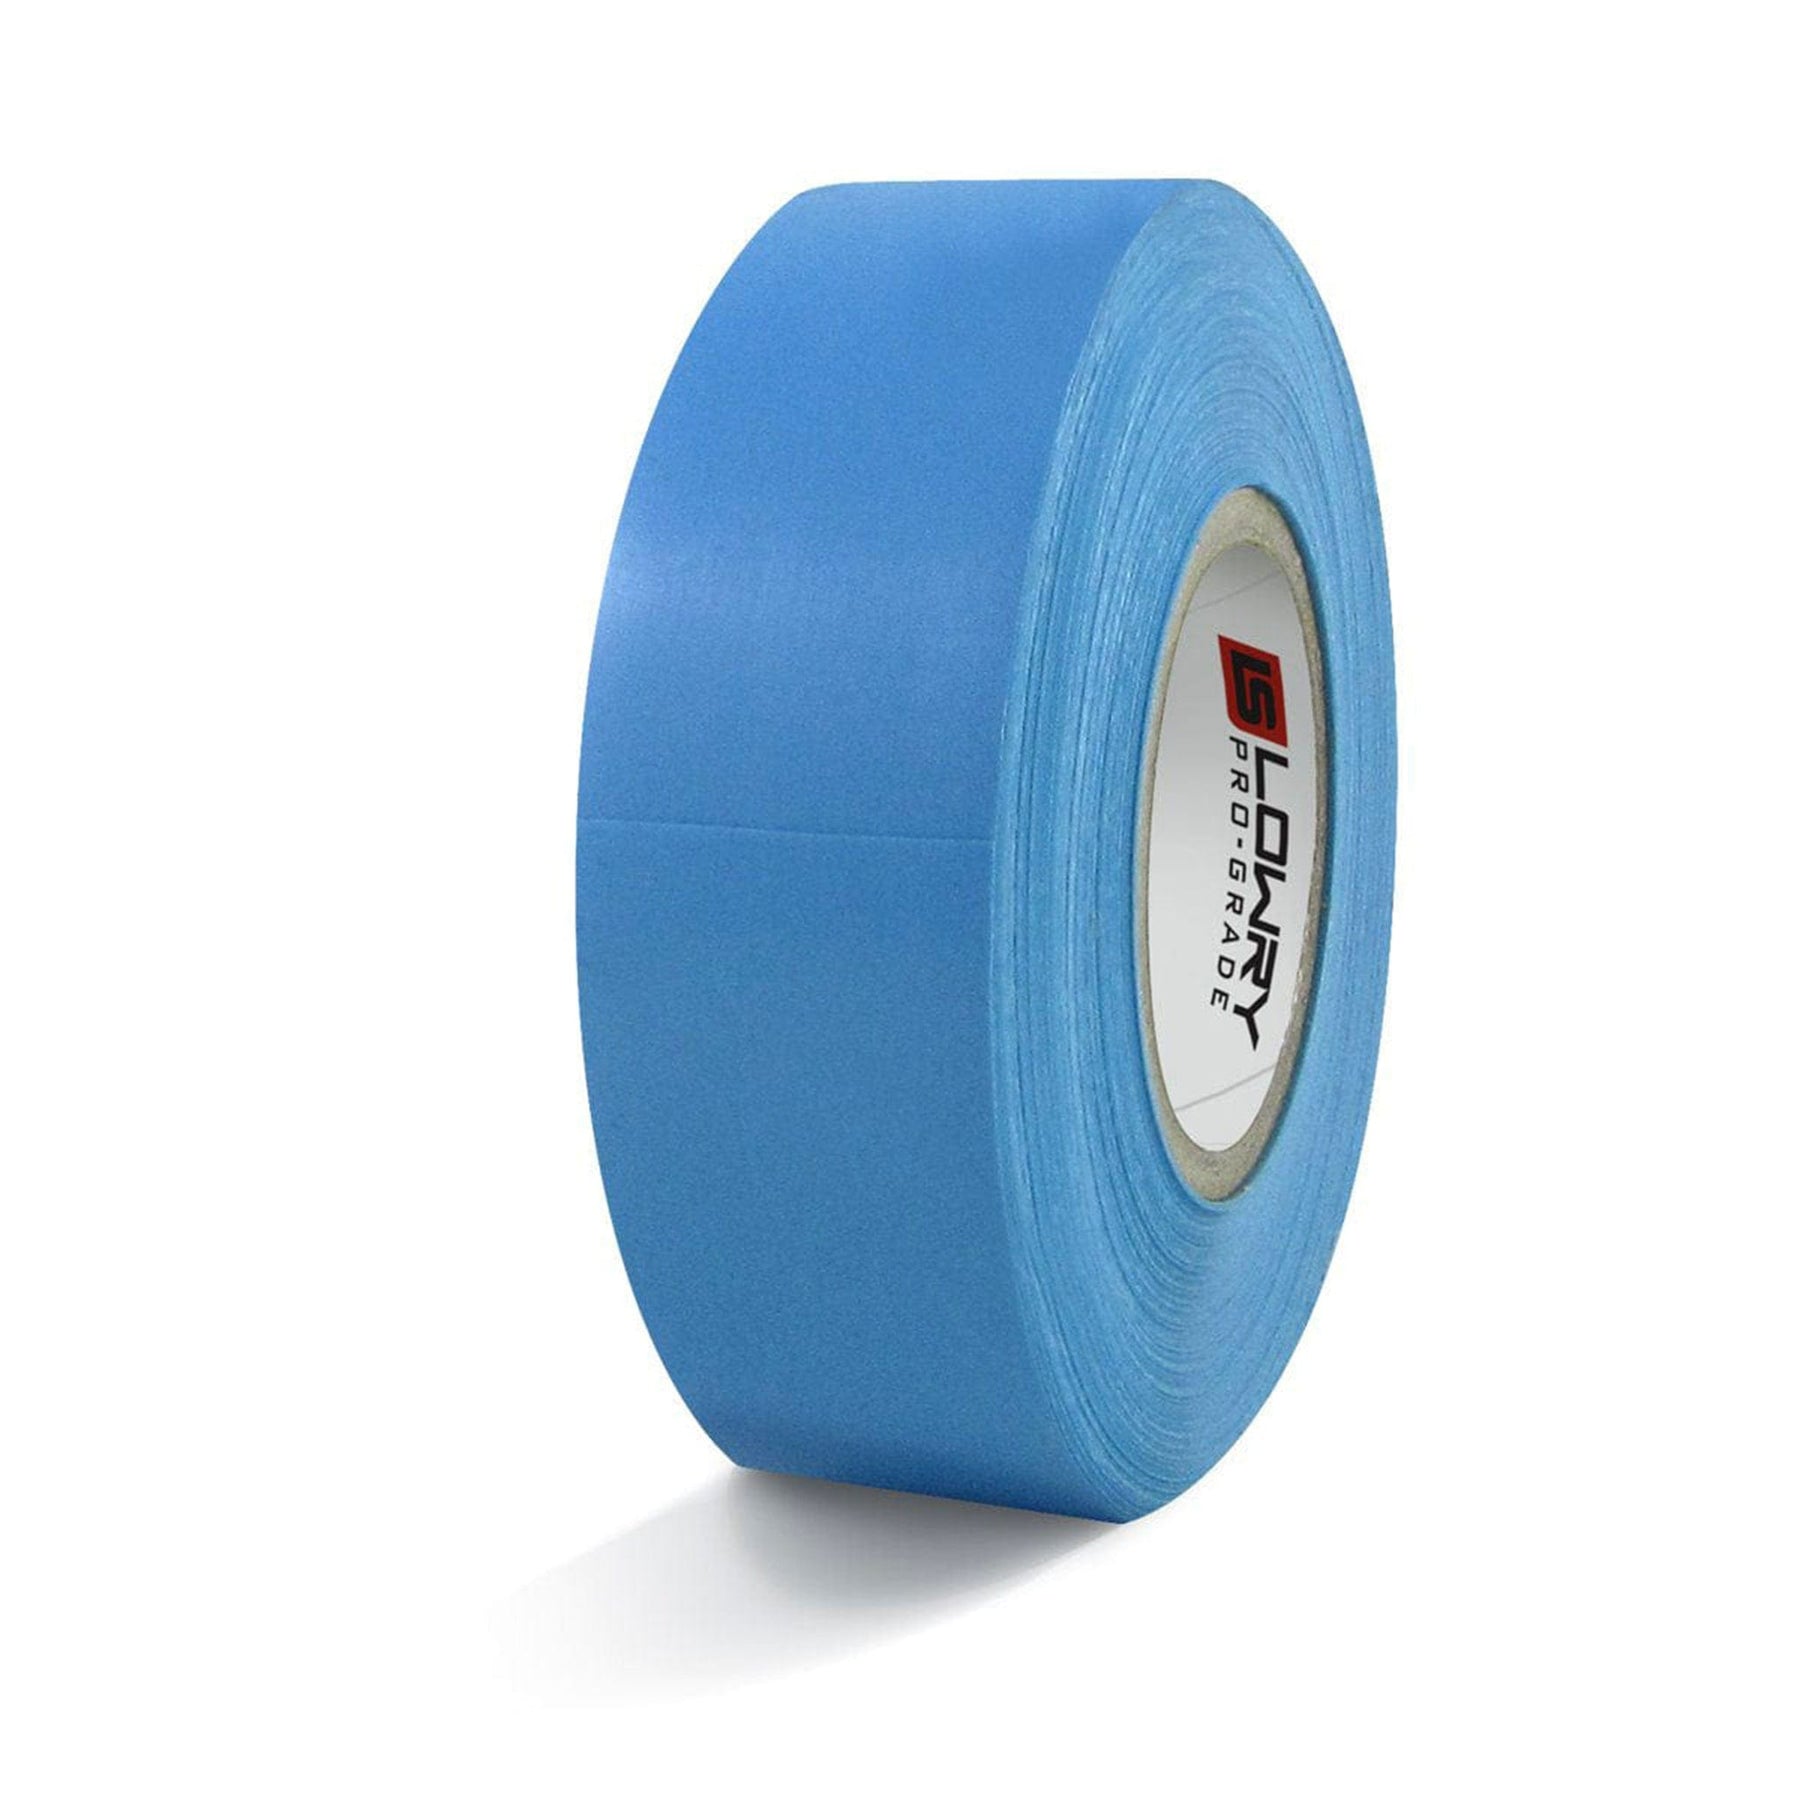  Meooeck 10 Rolls Hockey Tape Multipurpose Hockey Stick Tape  Adhesive Shin Pad Sock Tape for Ice Skate Sports Gifts Gear Equipment  (Bright Colors, 22 Yard) : Sports & Outdoors